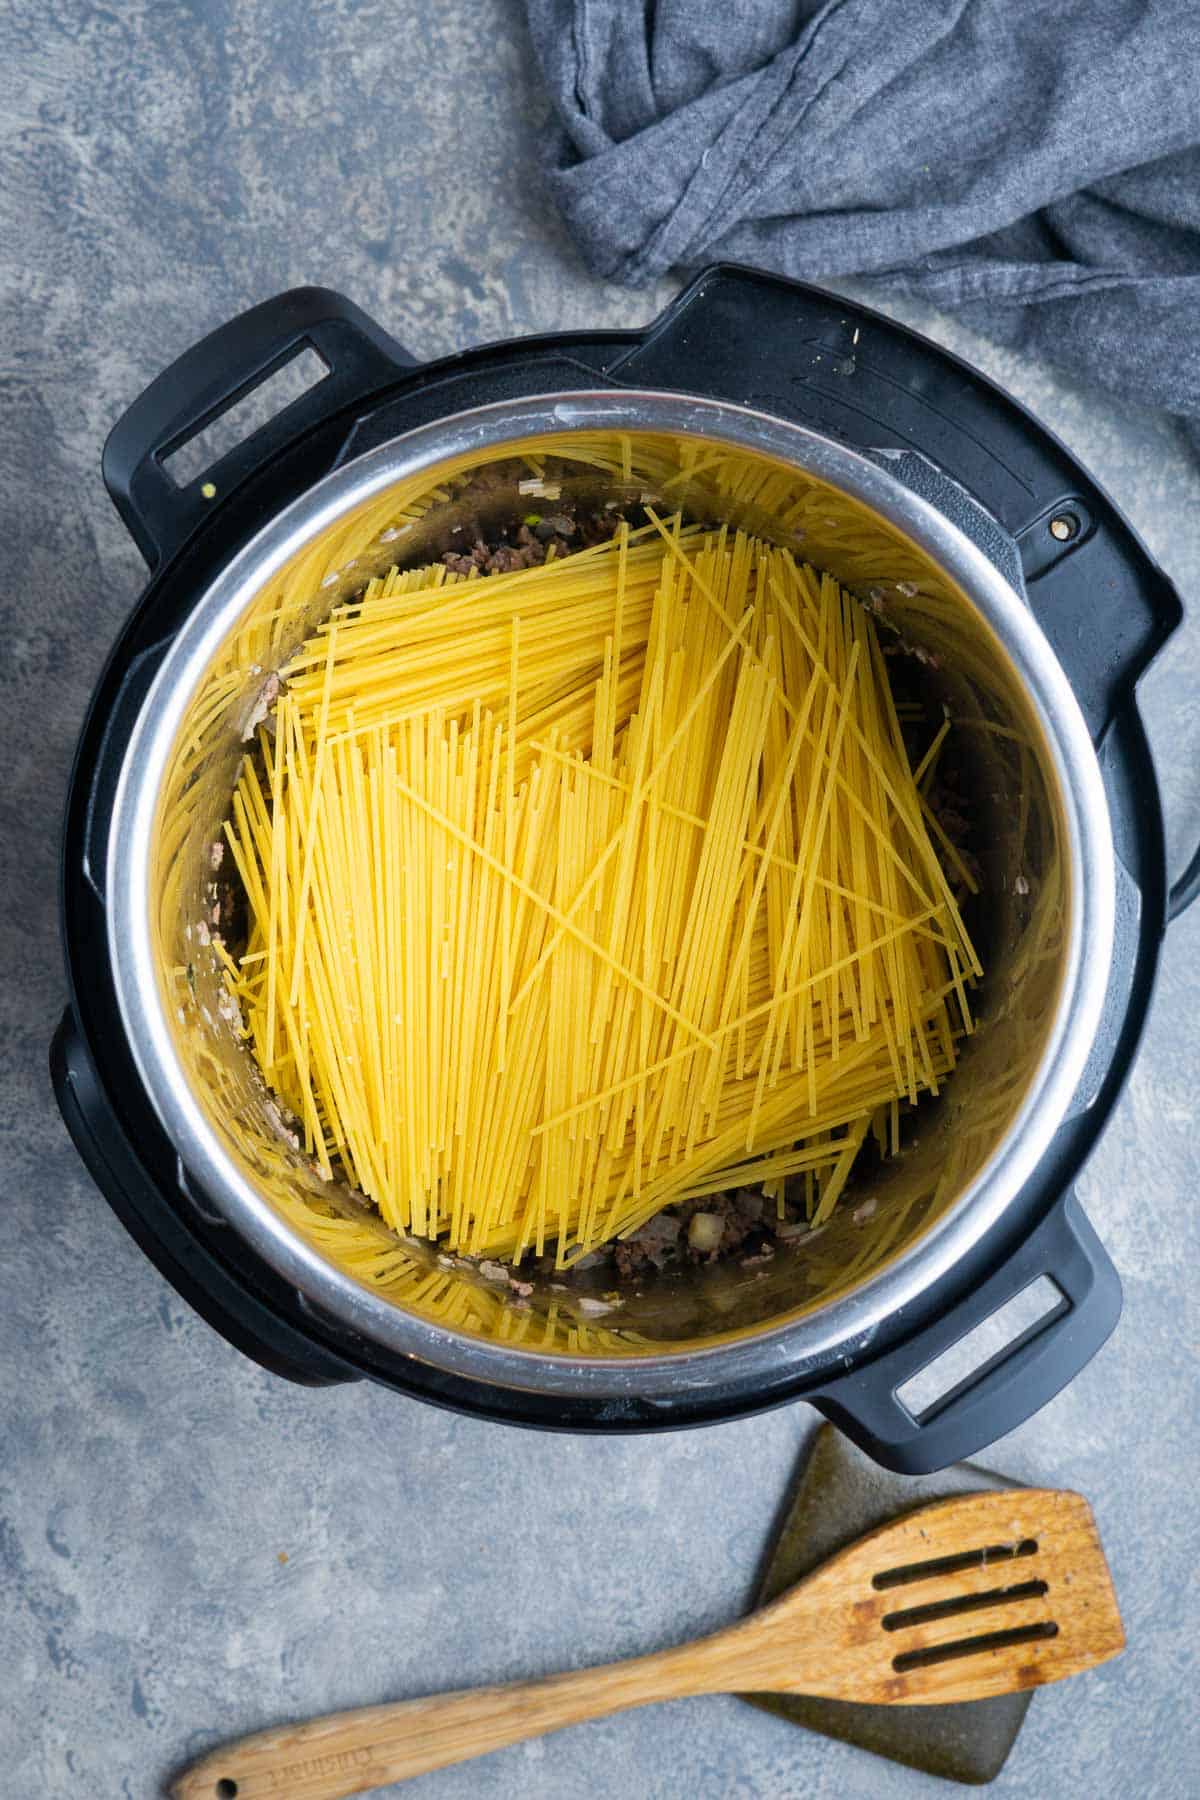 dry spaghetti noodles stacked criss cross in the instant pot